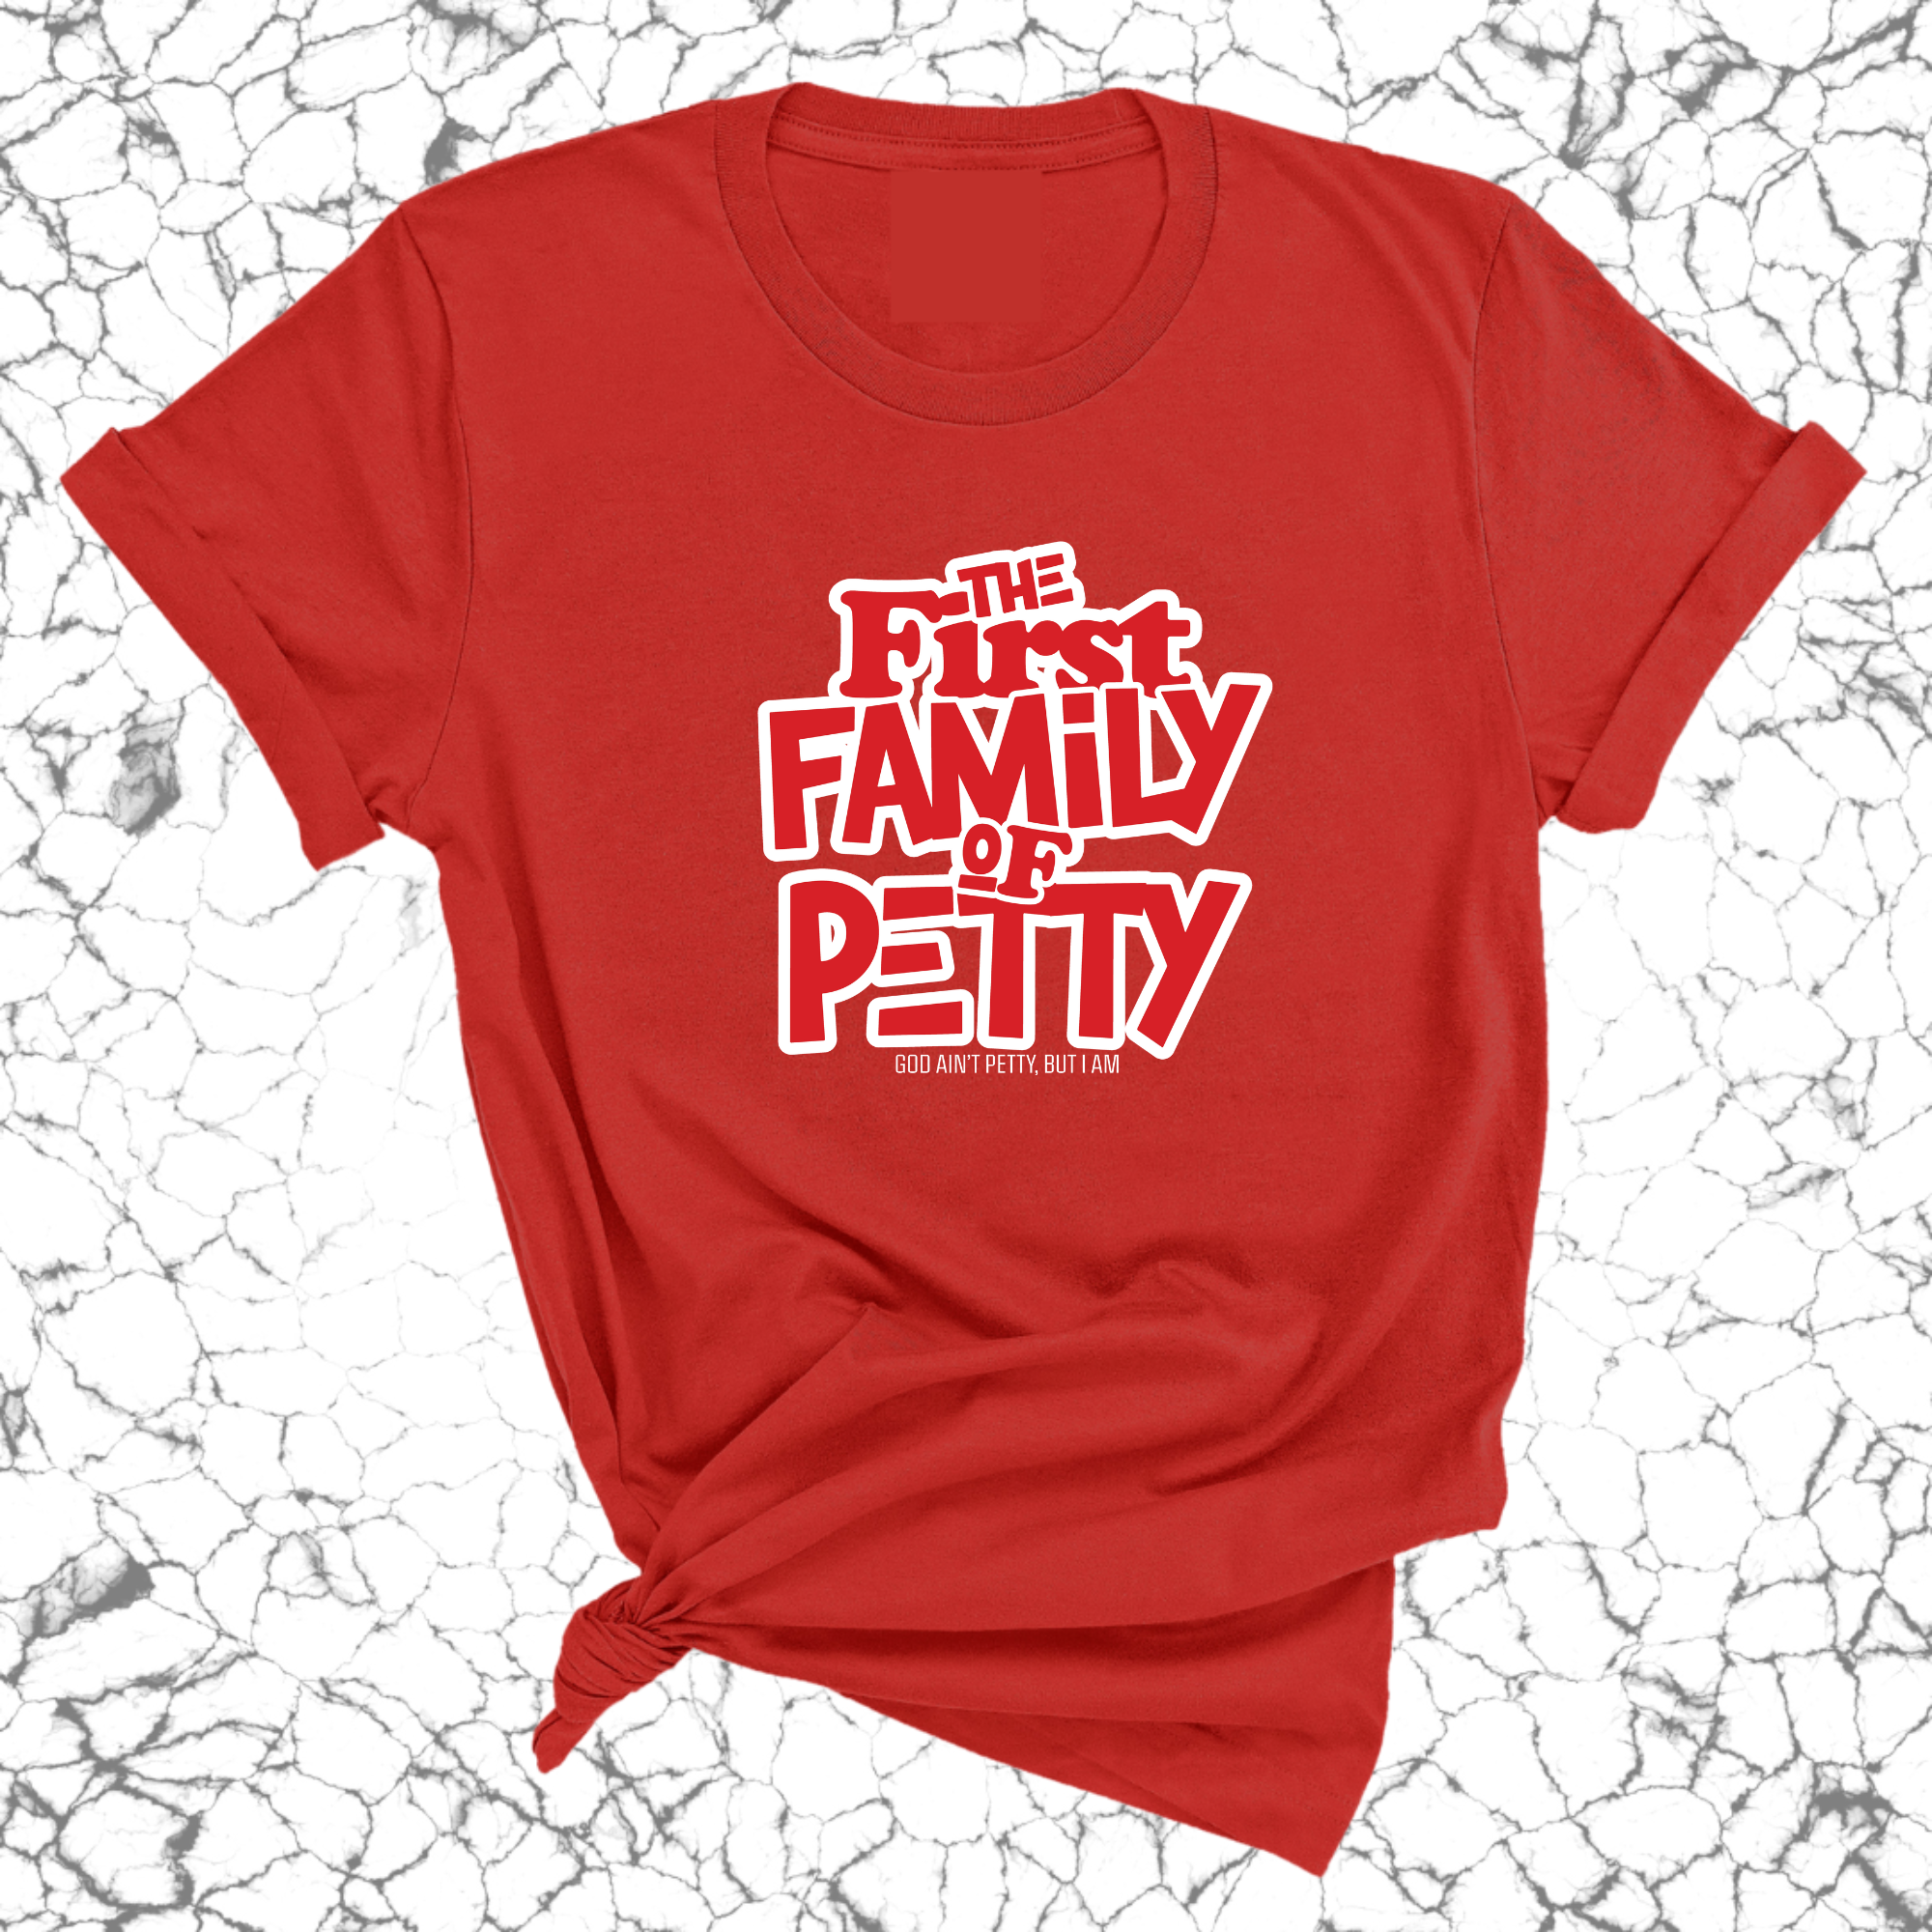 The First Family of Petty Unisex Tee (Christmas Colors)-T-Shirt-The Original God Ain't Petty But I Am